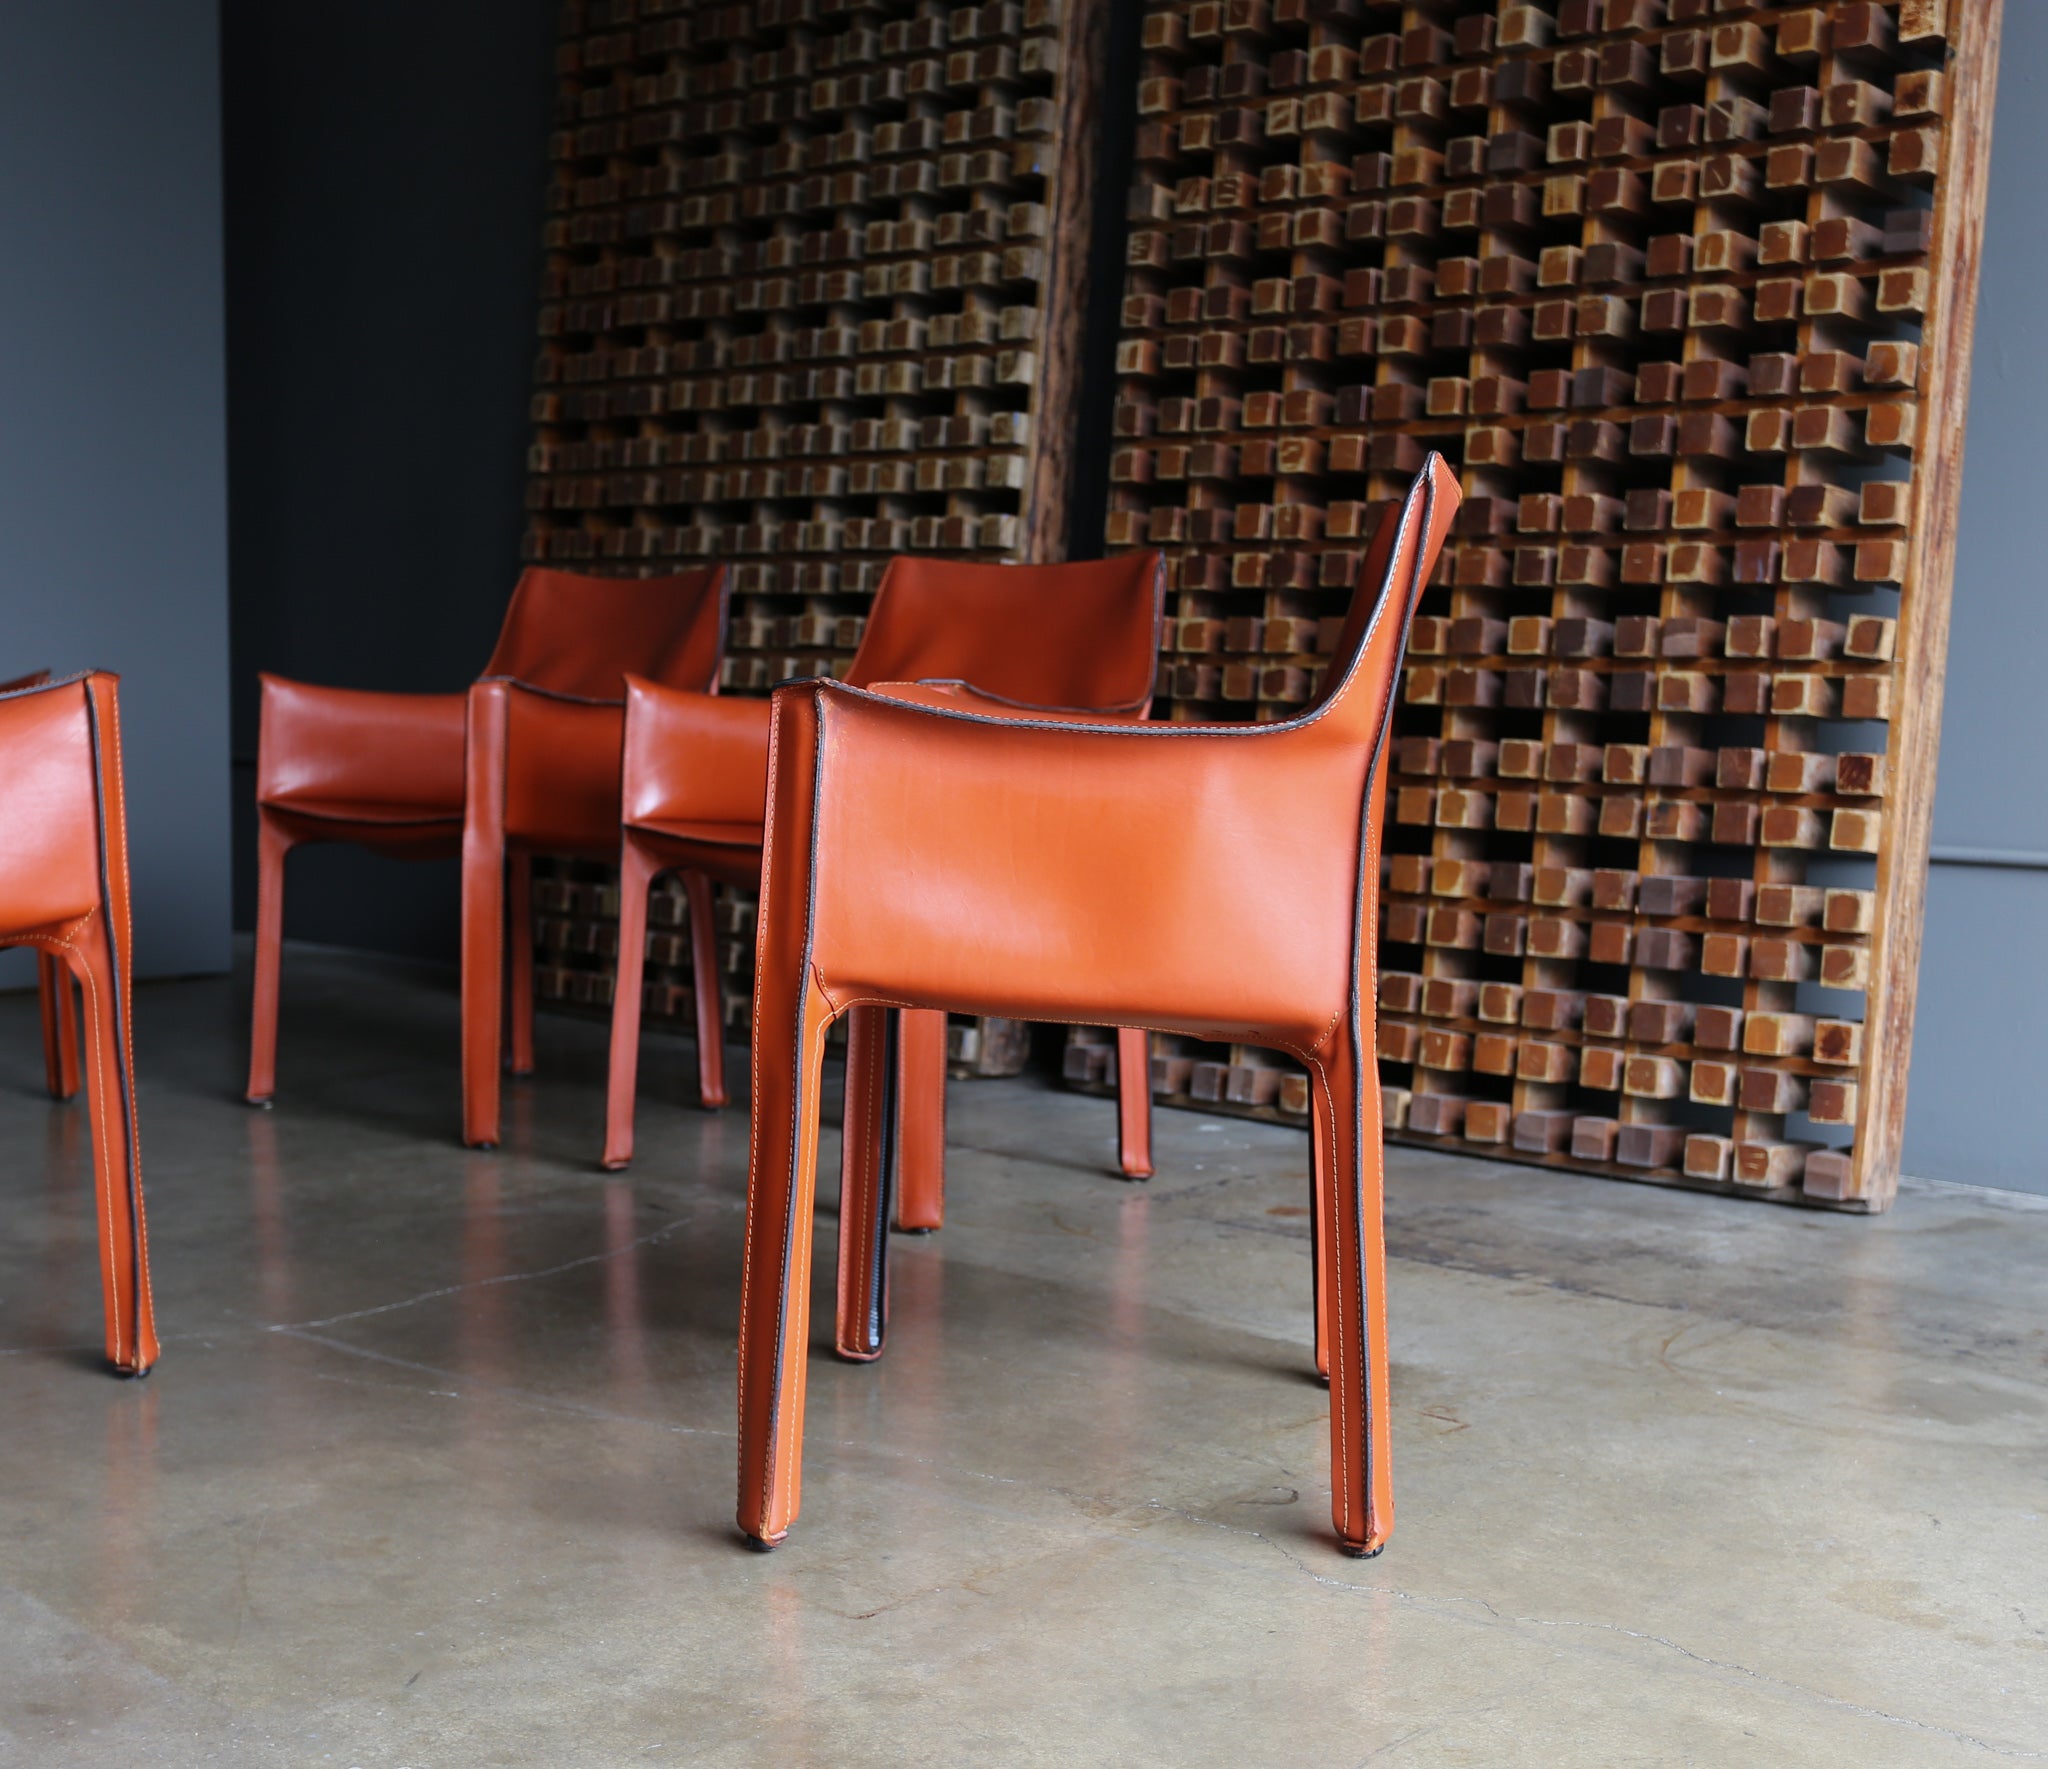 = SOLD = Mario Bellini Leather "Cab" Chairs for Cassina, circa 1985